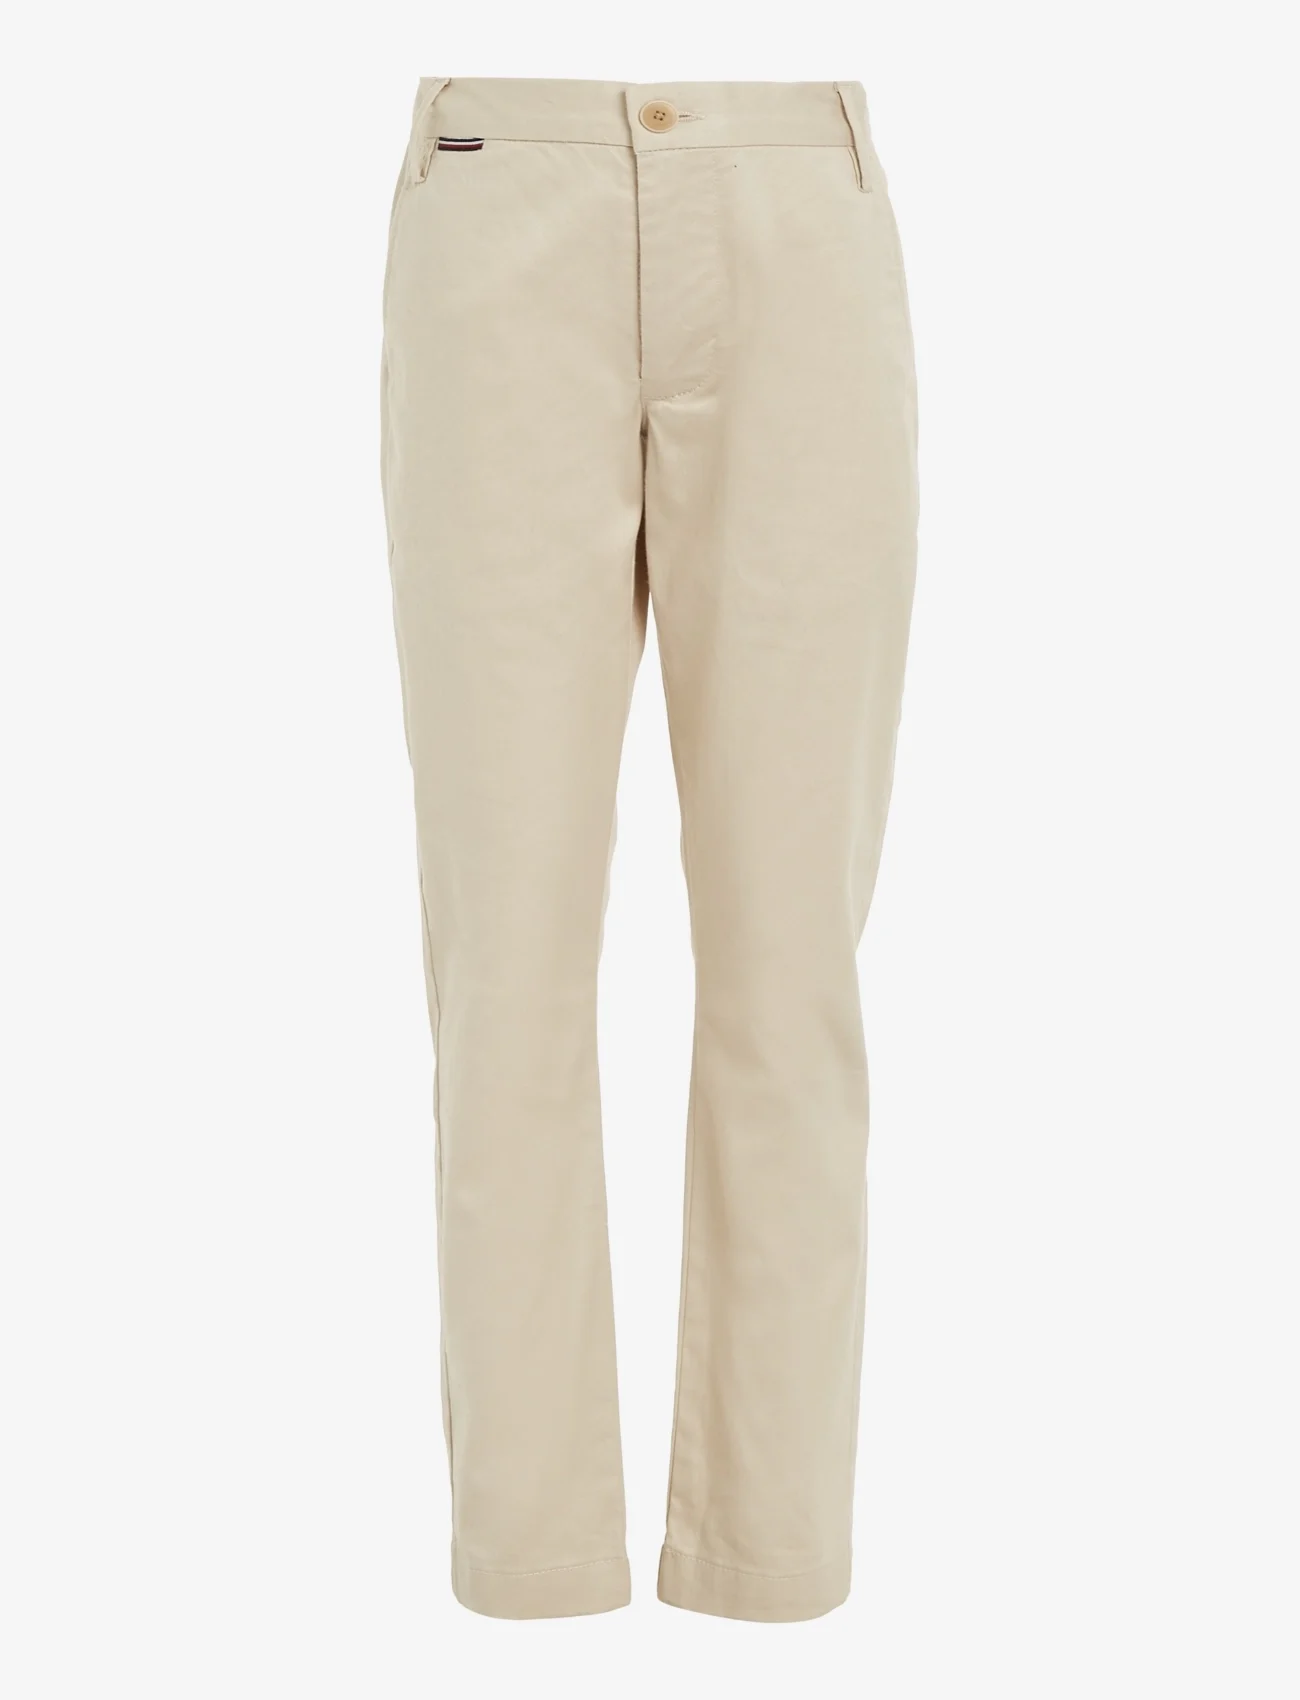 Tommy Hilfiger - 1985 CHINO PANTS - sommarfynd - classic beige - 0